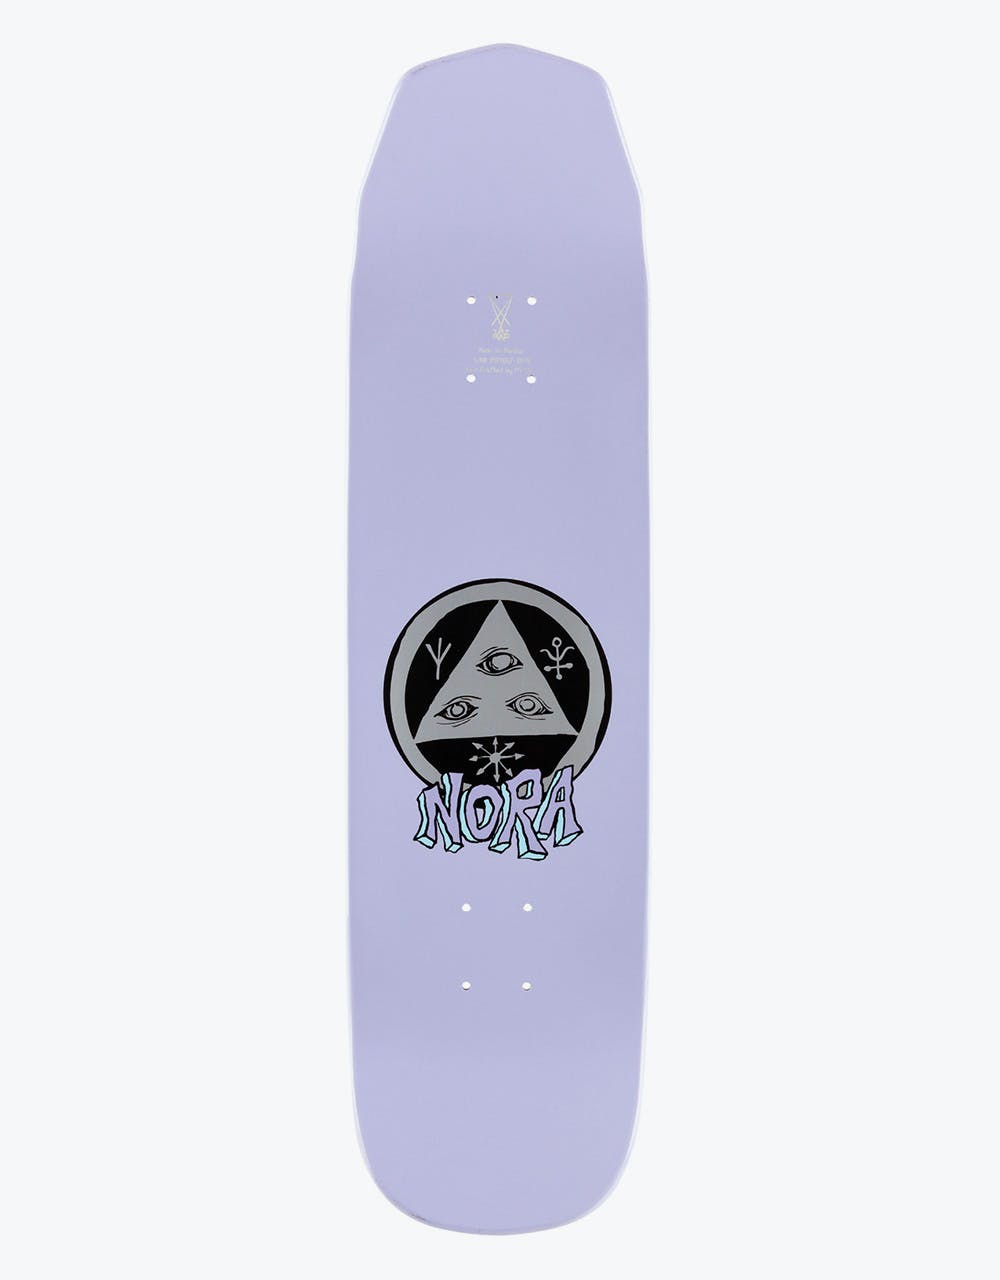 Welcome Nora Teddy on Wicked Princess Skateboard Deck - 8.125"